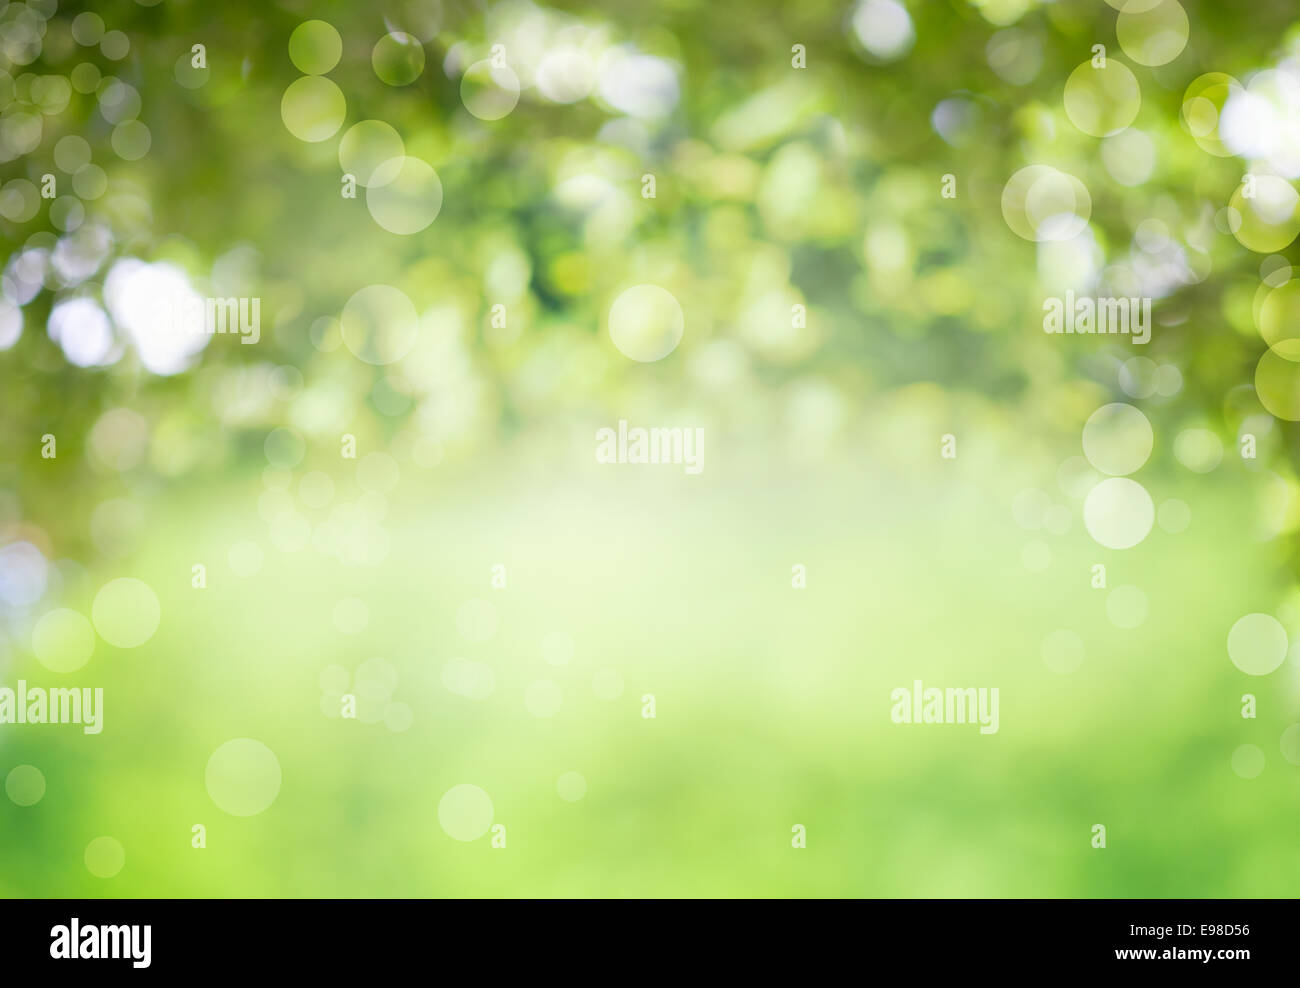 Fresh healthy green bio background with abstract blurred foliage and bright summer sunlight and a central copyspace for your text or advertisment Stock Photo